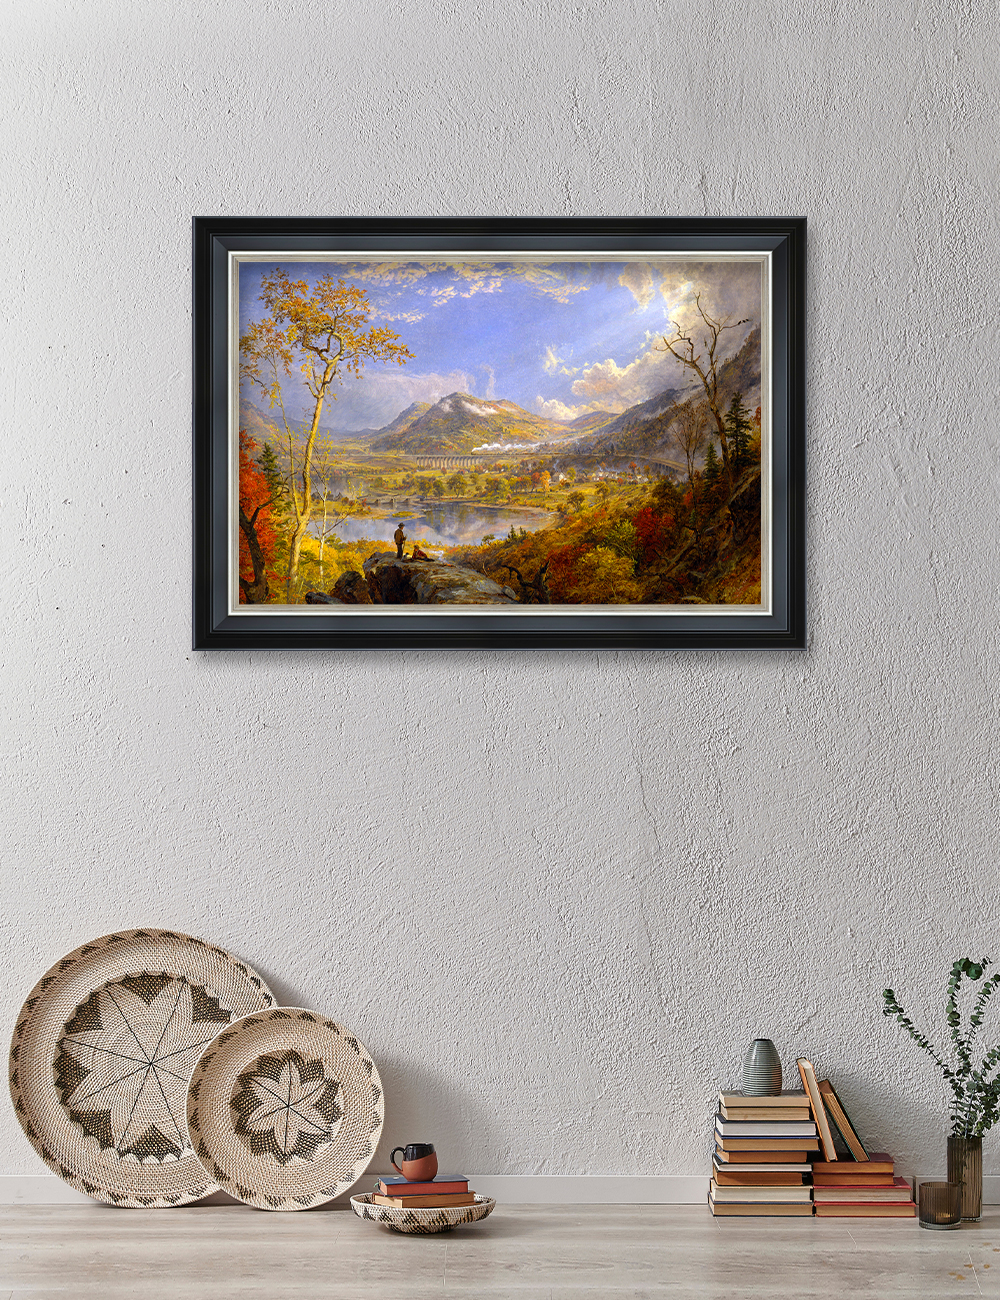 DECORARTS Starrucca Viaduct Pennsylvania by Jasper Francis Cropsey, Giclee  Print on Acid Free Cotton Canvas Matching with Solid Wood Frame for Home  Decor. Total Size w/ Frame: W 27.25 x H